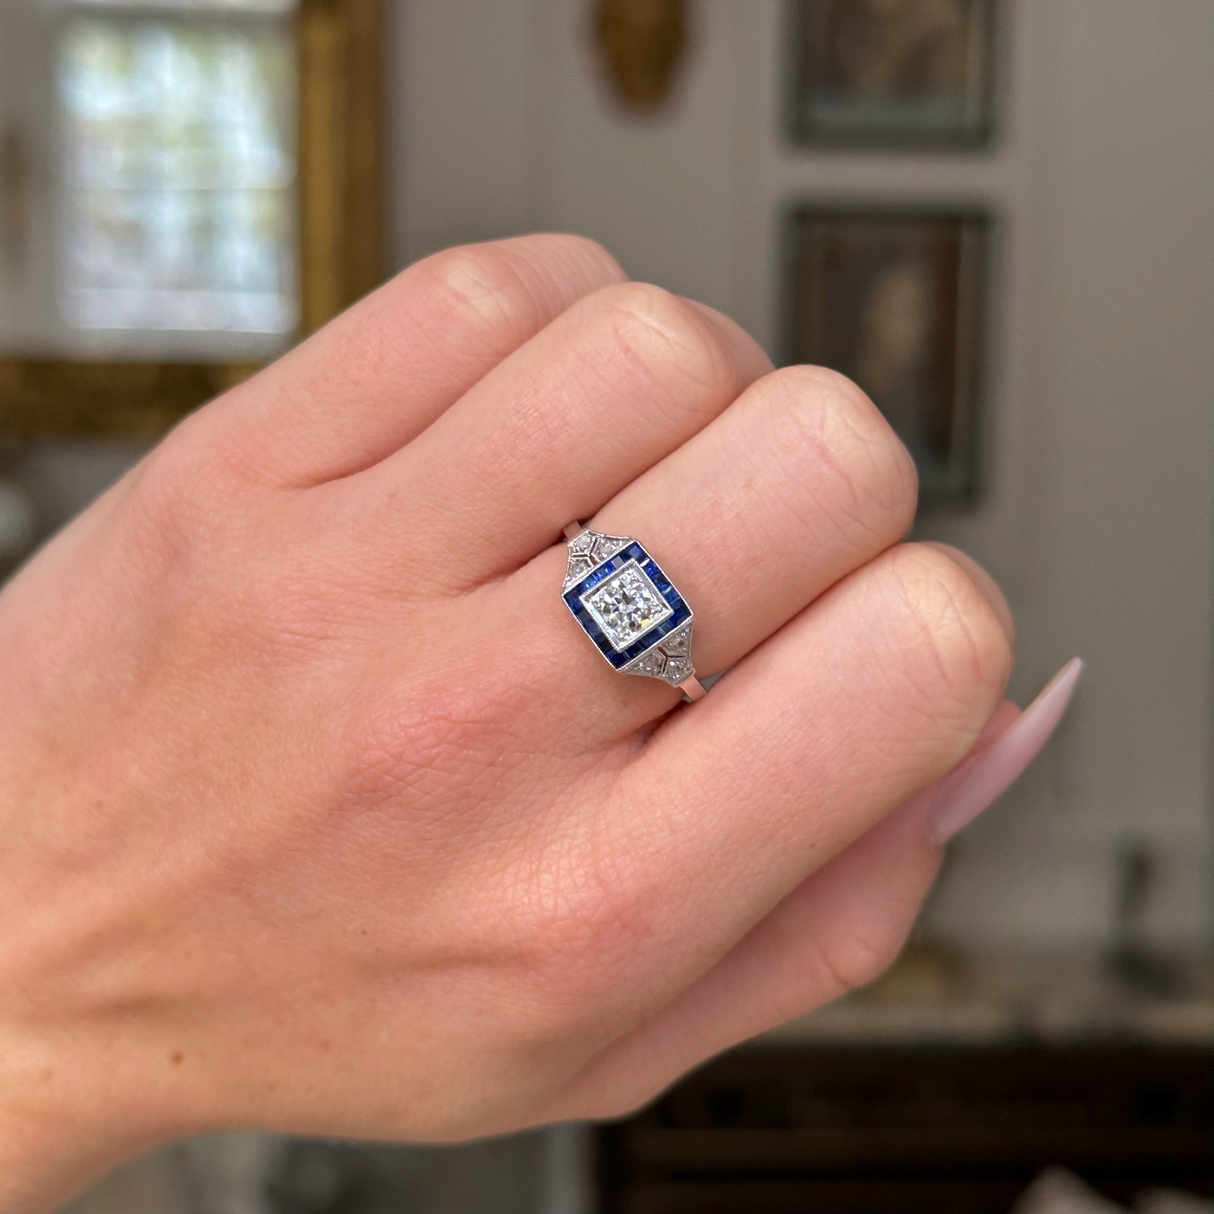 Vintage sapphire and diamond engagement ring, worn on hand. 